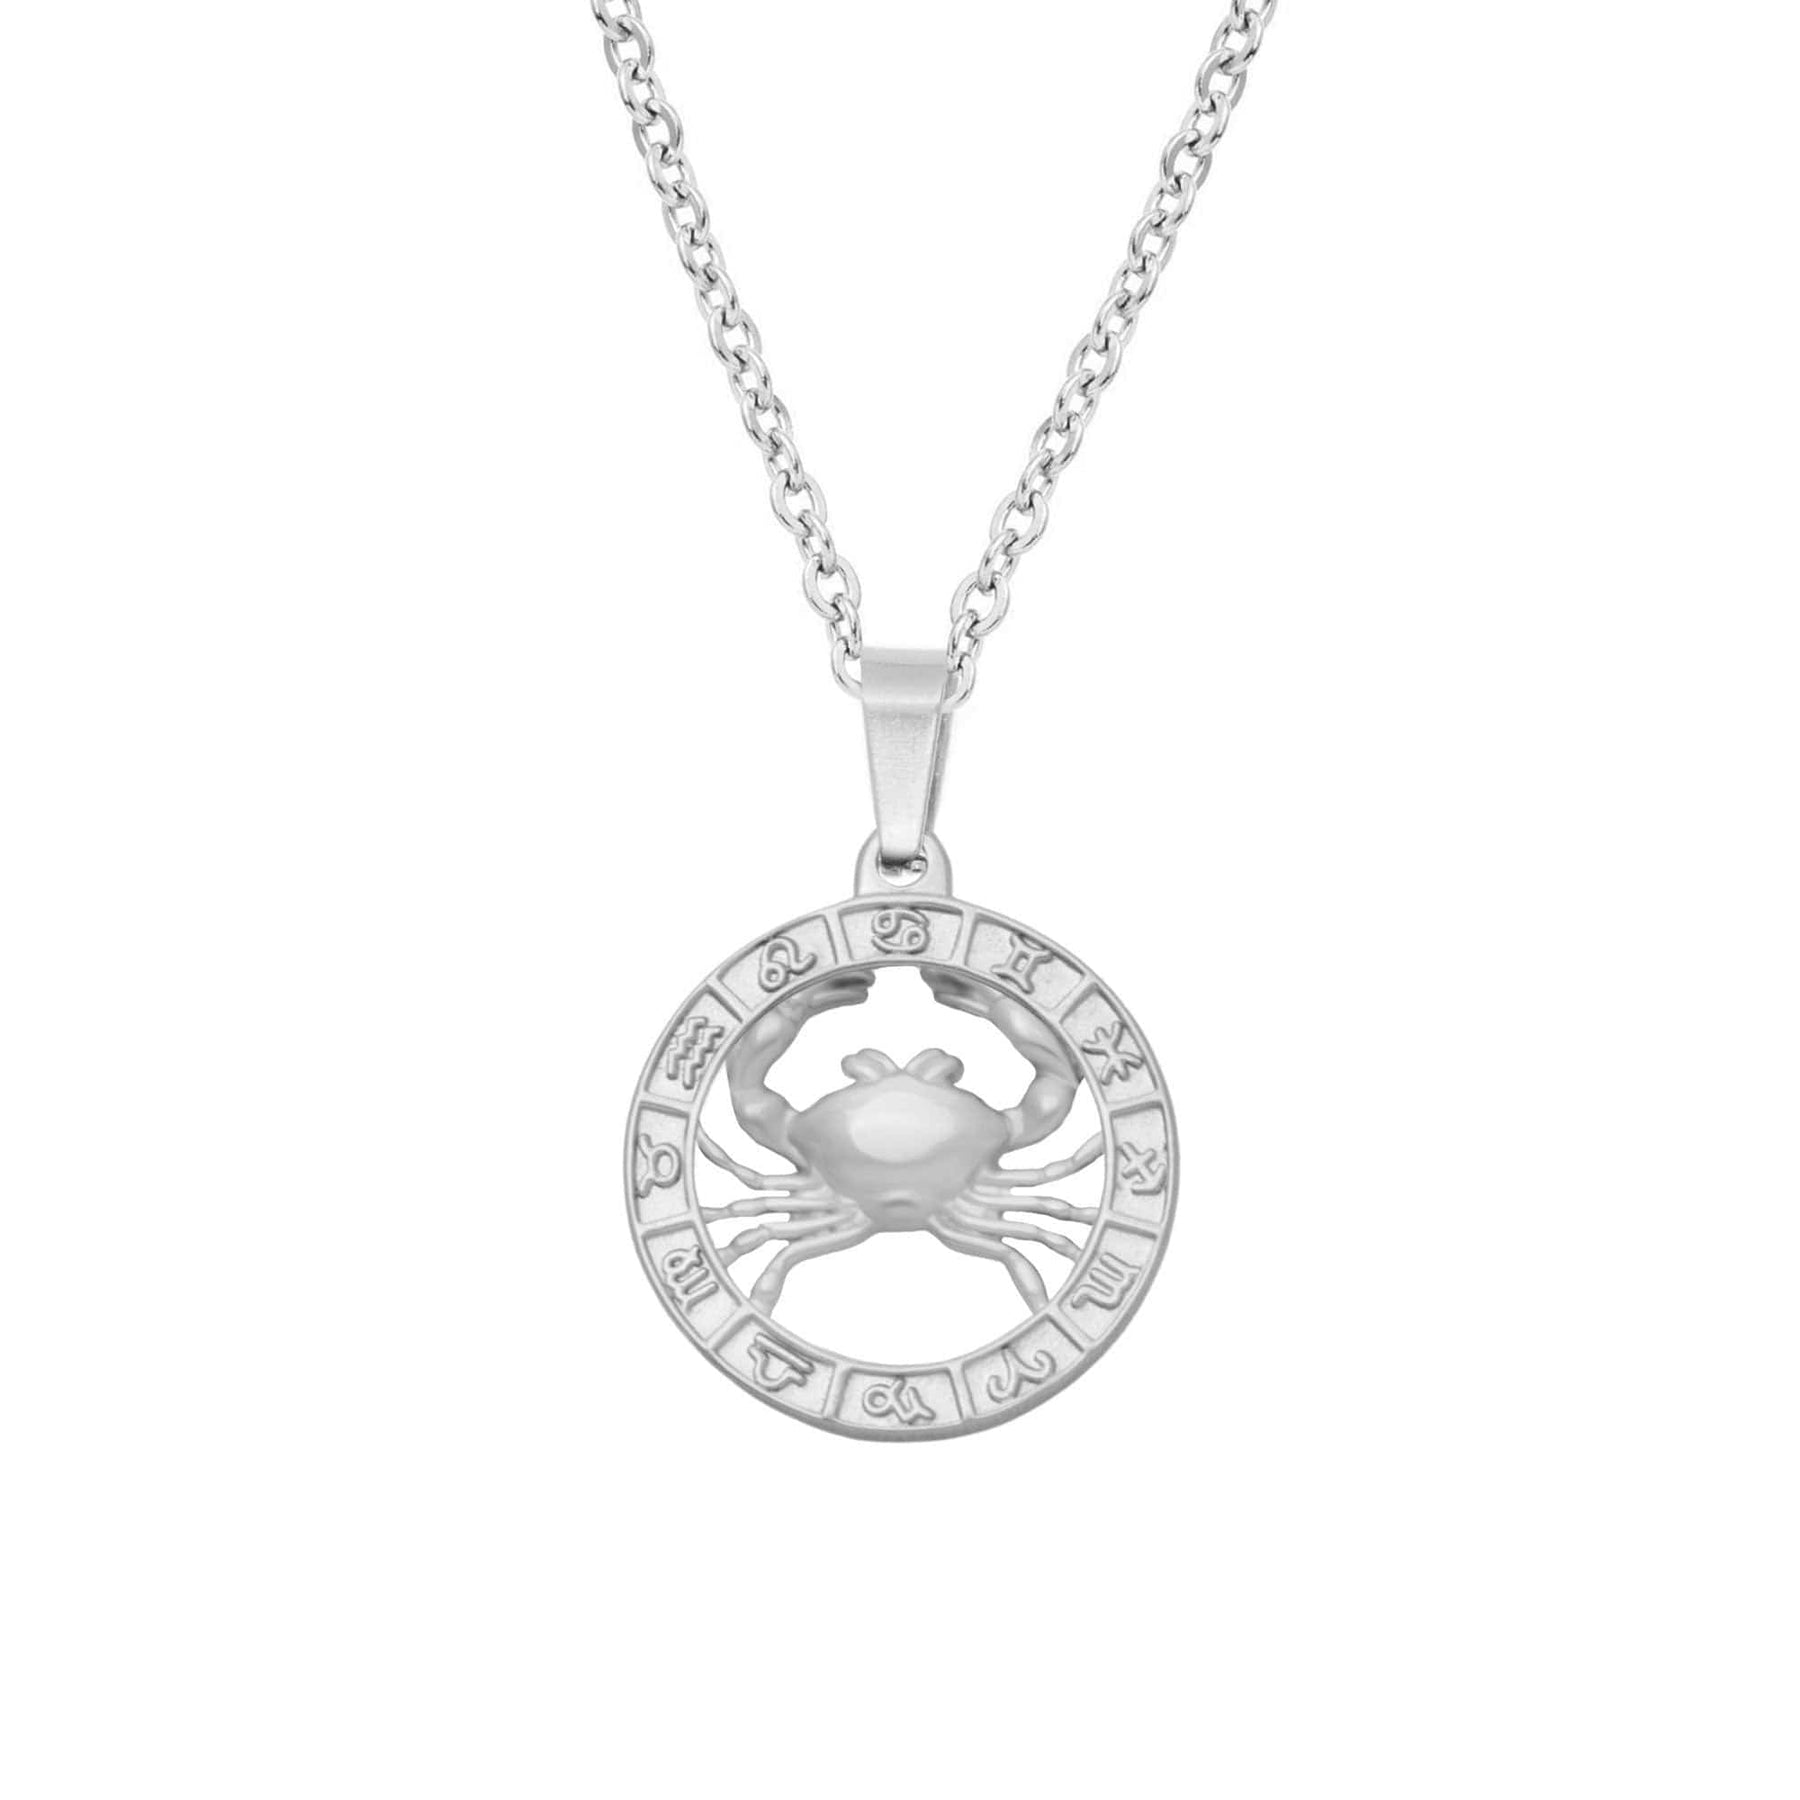 BohoMoon Stainless Steel Classic Zodiac Necklace Silver / Cancer